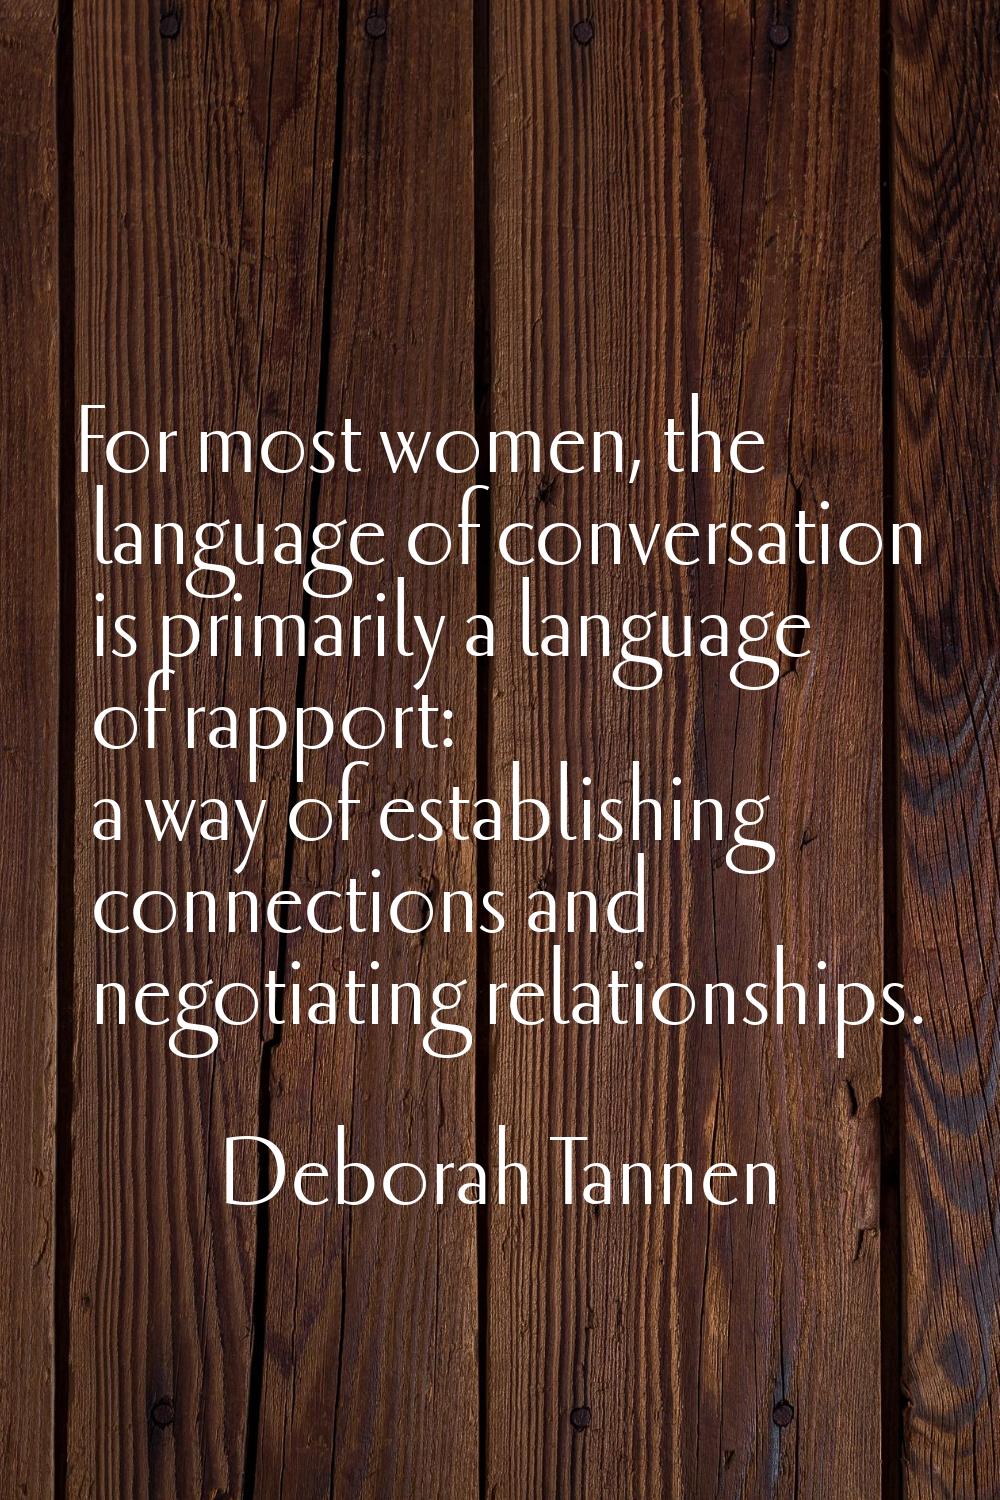 For most women, the language of conversation is primarily a language of rapport: a way of establish